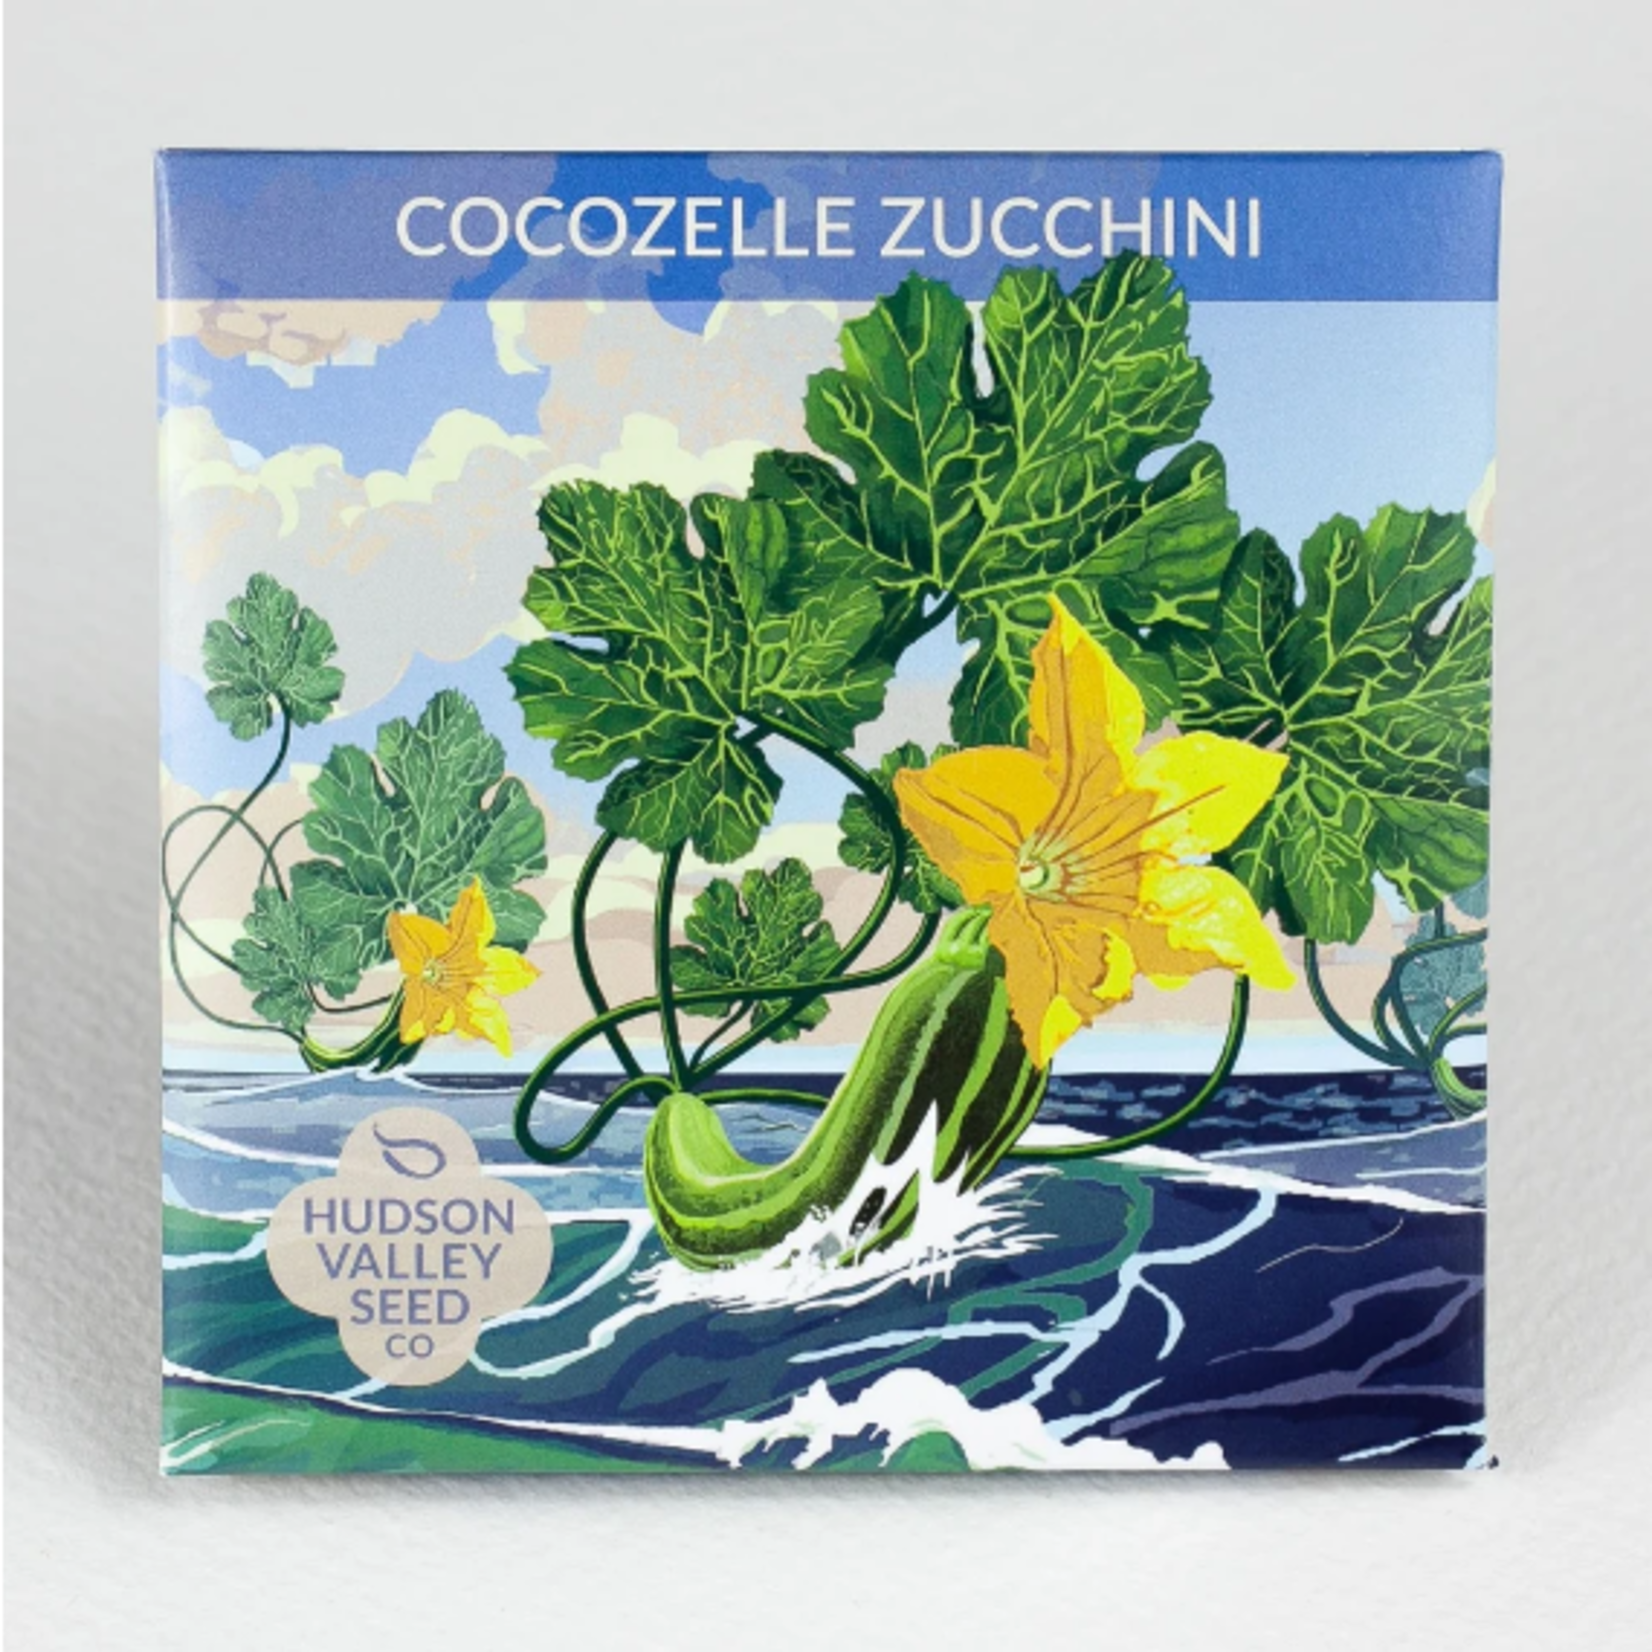 Hudson Valley Seeds Cocozelle Zucchini